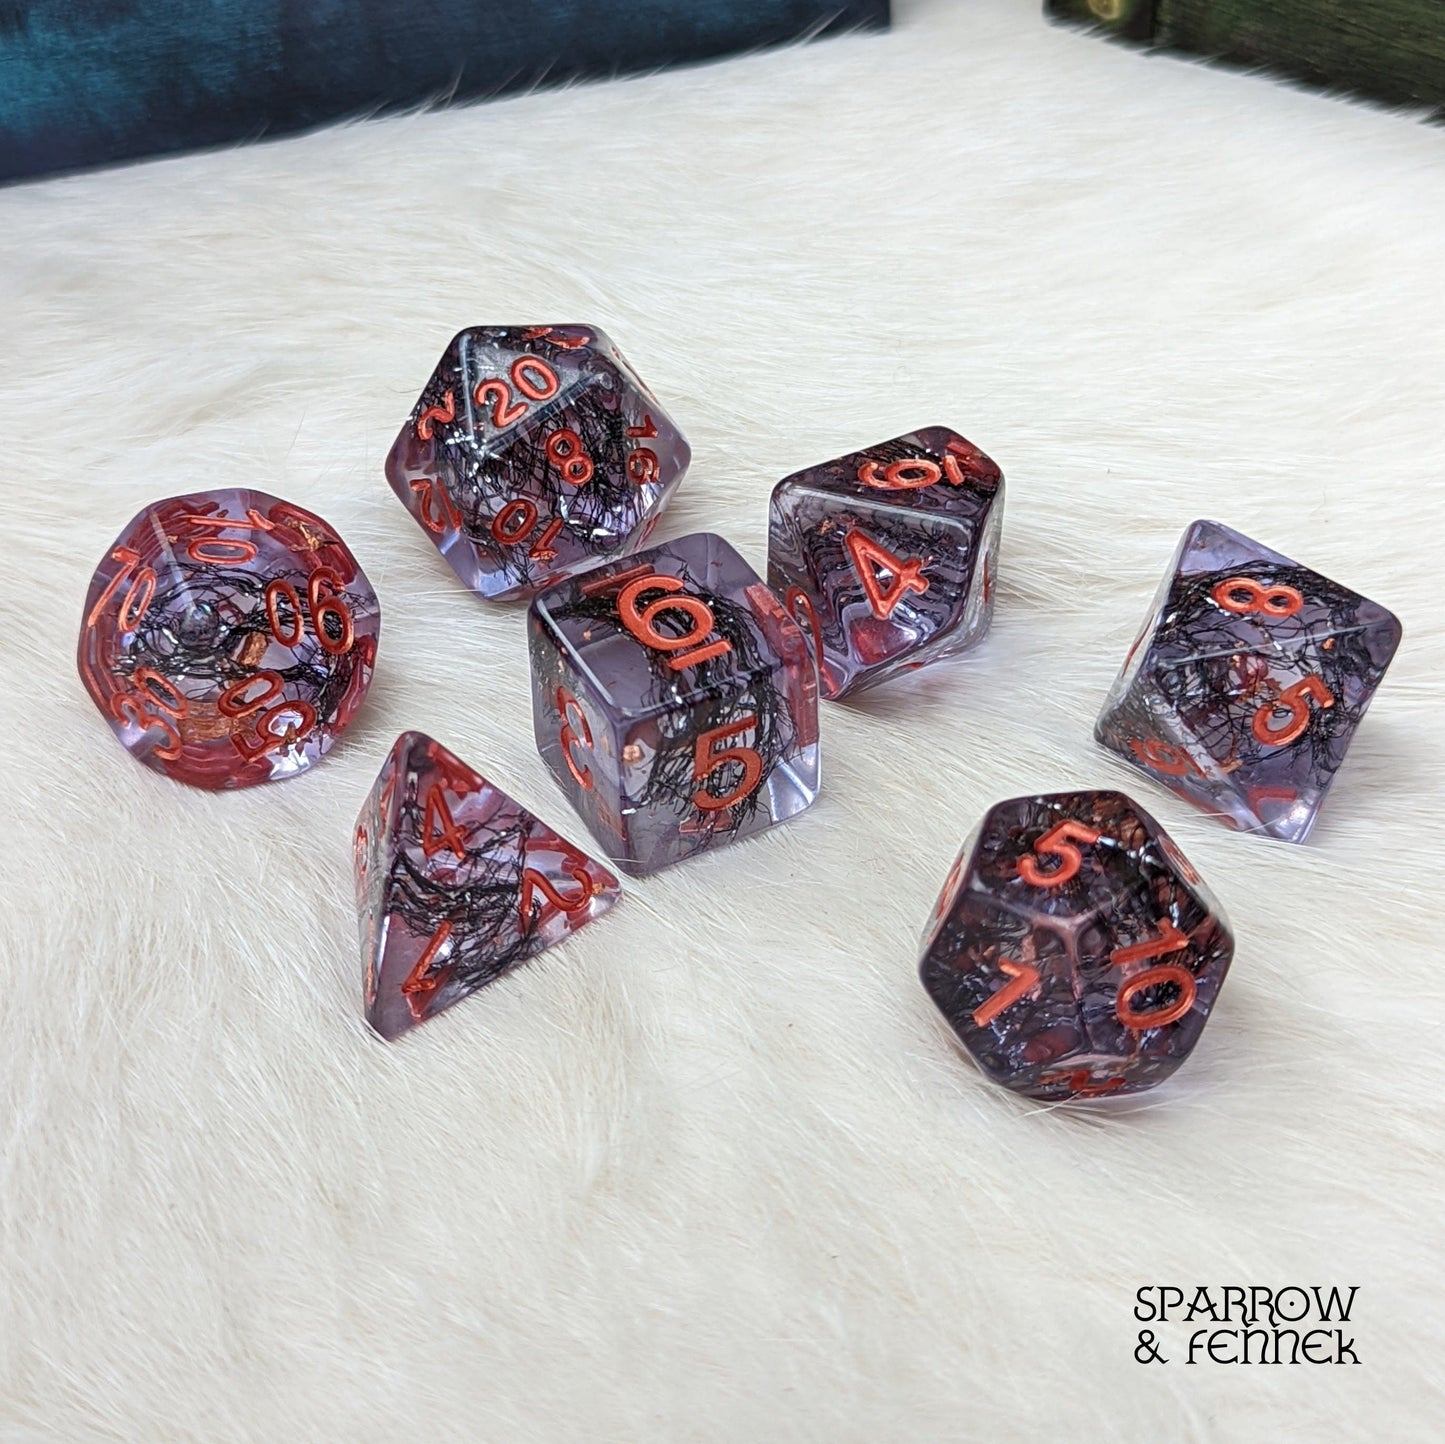 Hollow One Dice Set. 7 Piece Undead Themed Dice Set with Black Thread and Copper Foil